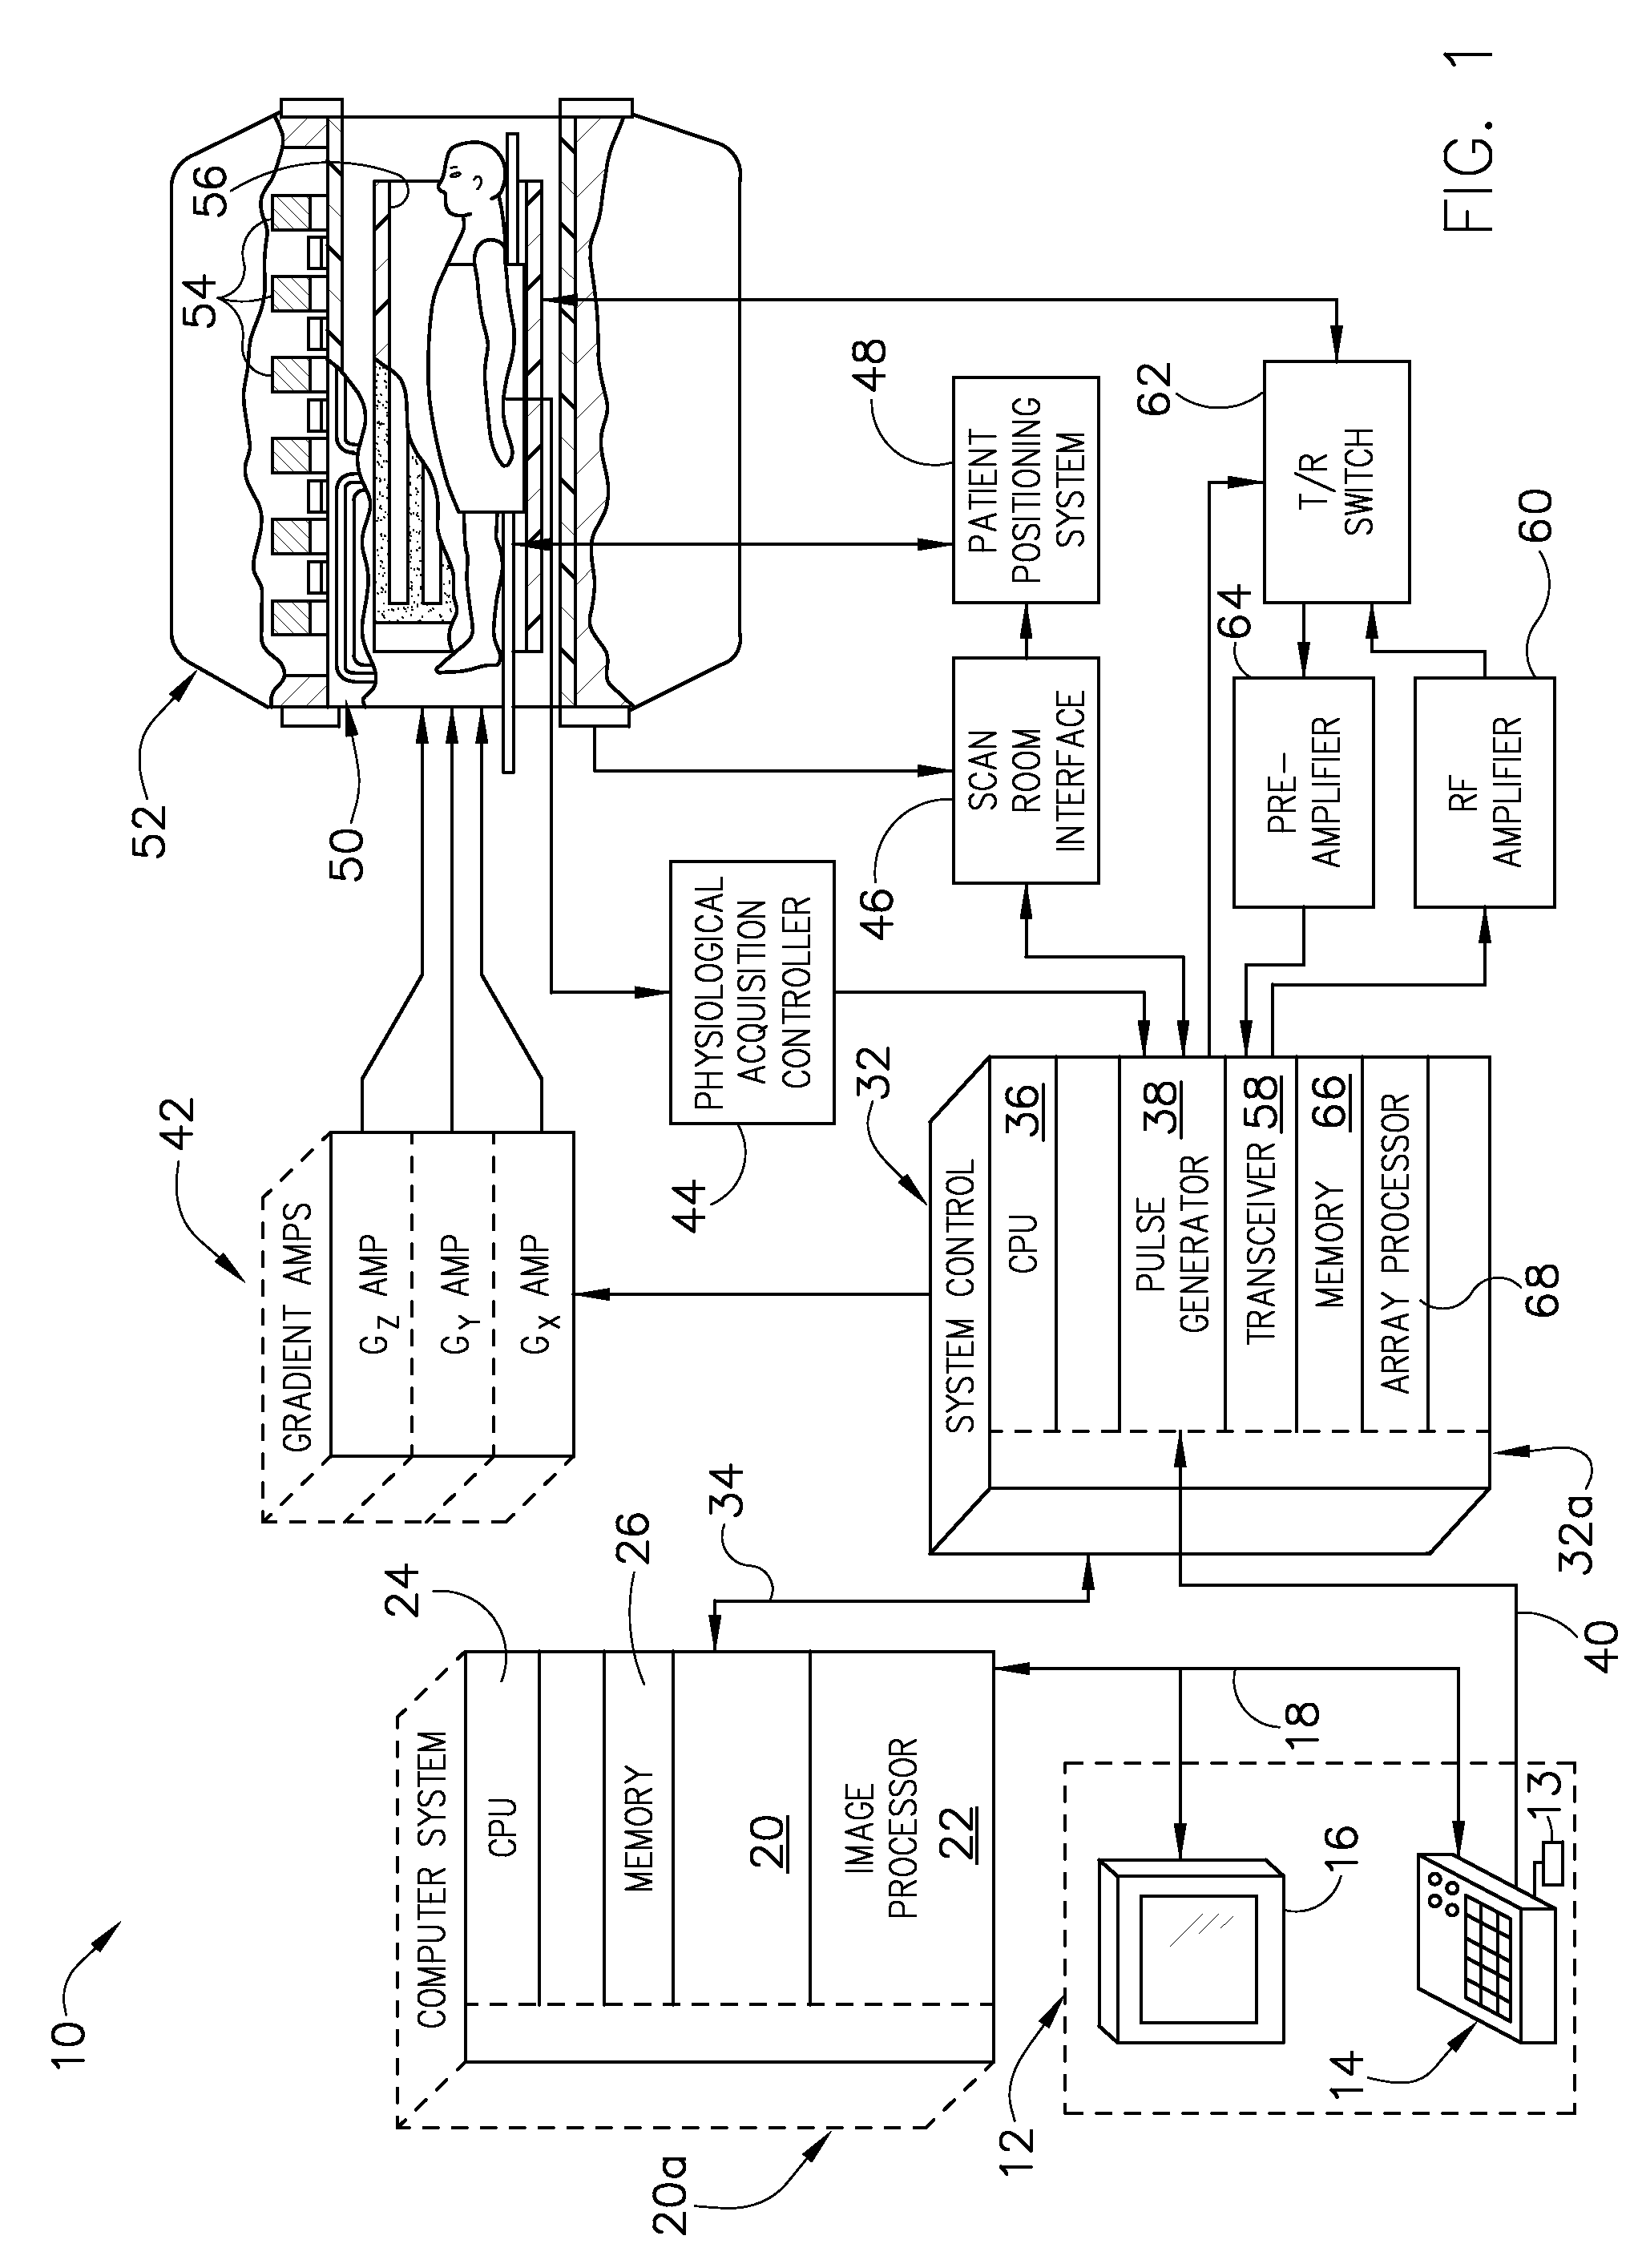 Apparatus and method for optimizing the spectra of parallel excitation pulses